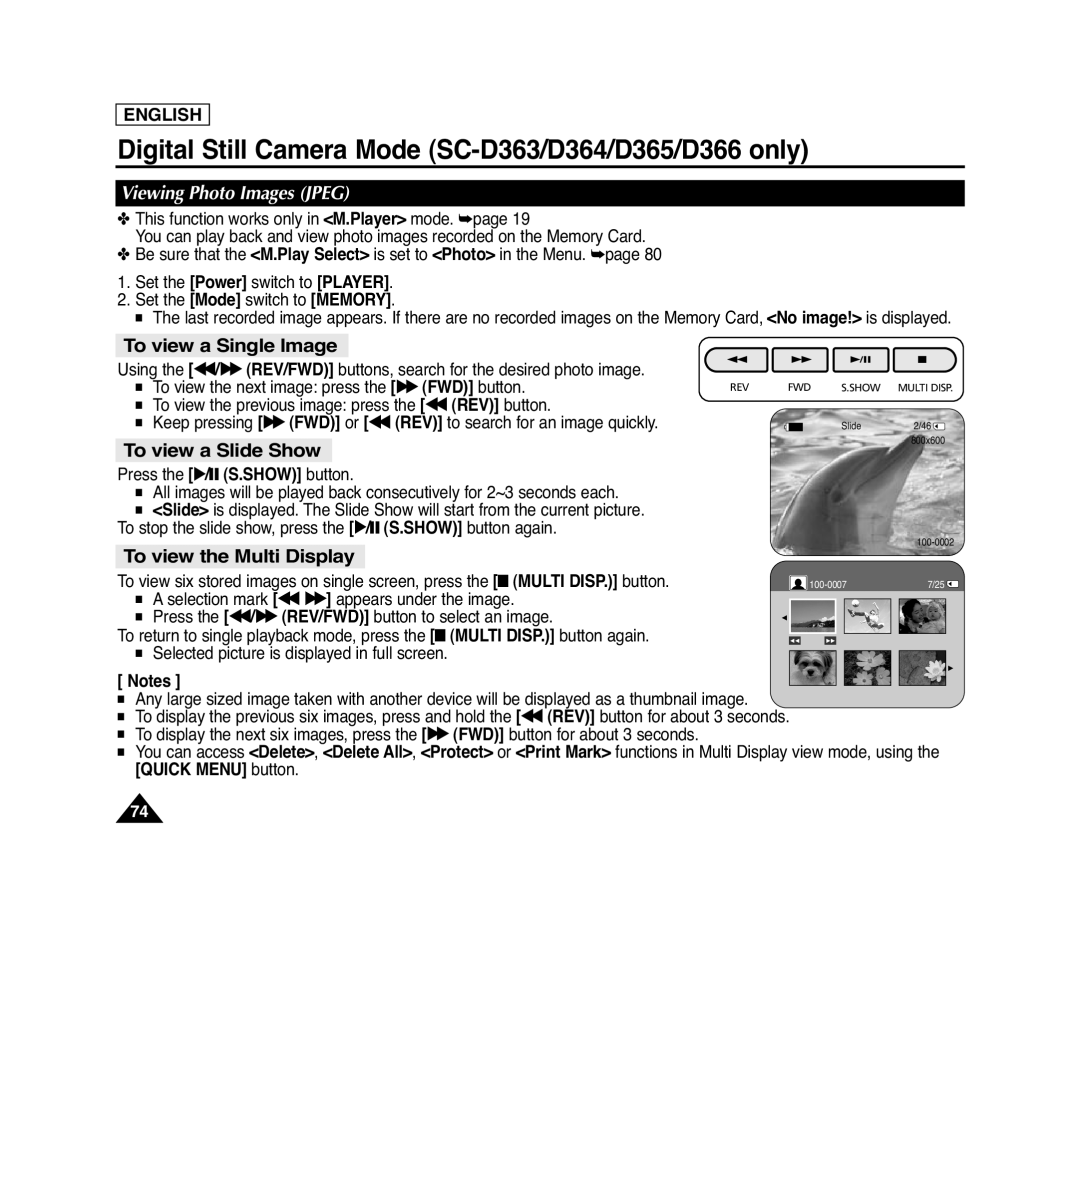 Samsung SC-D364 manual To view a Single Image, To view a Slide Show, To view the Multi Display, Viewing Photo Images JPEG 